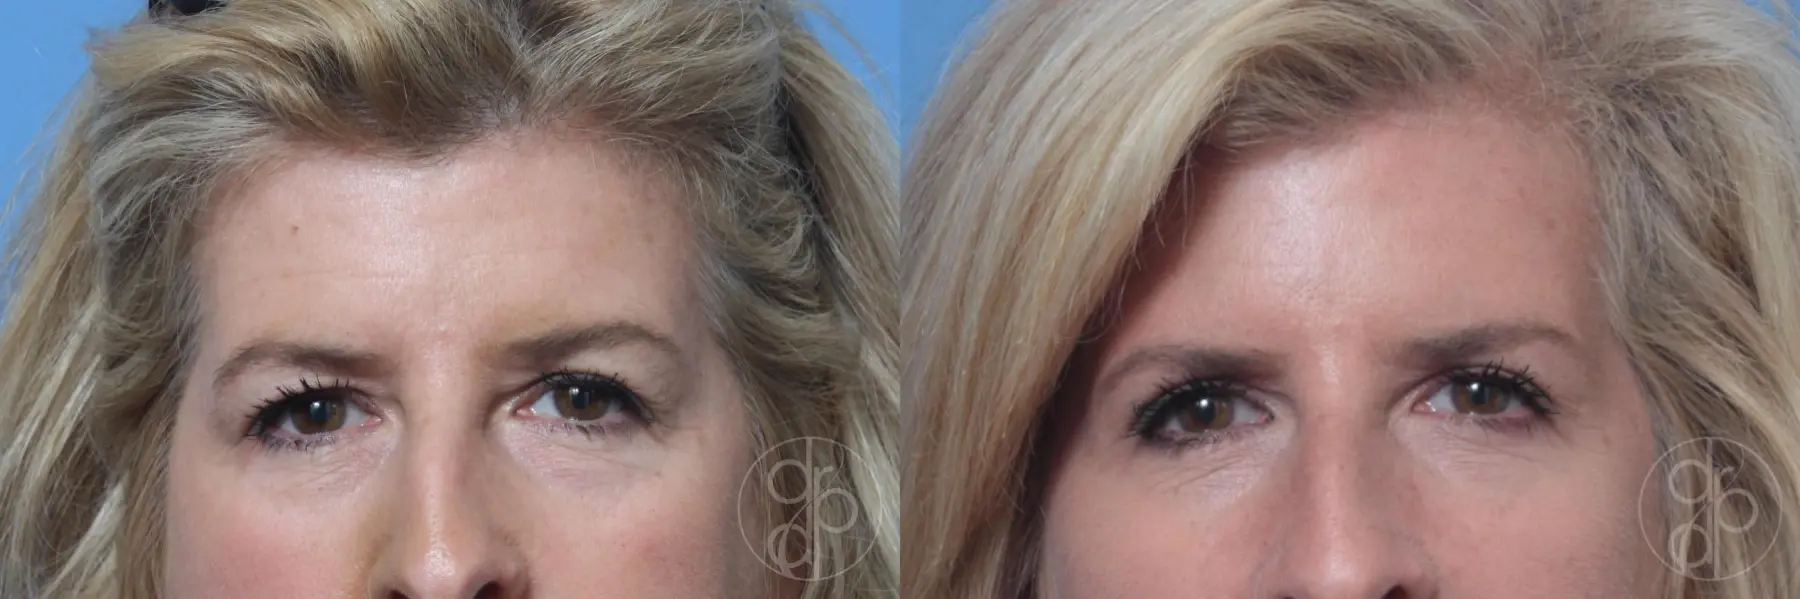 patient 10616 blepharoplasty before and after result - Before and After 1